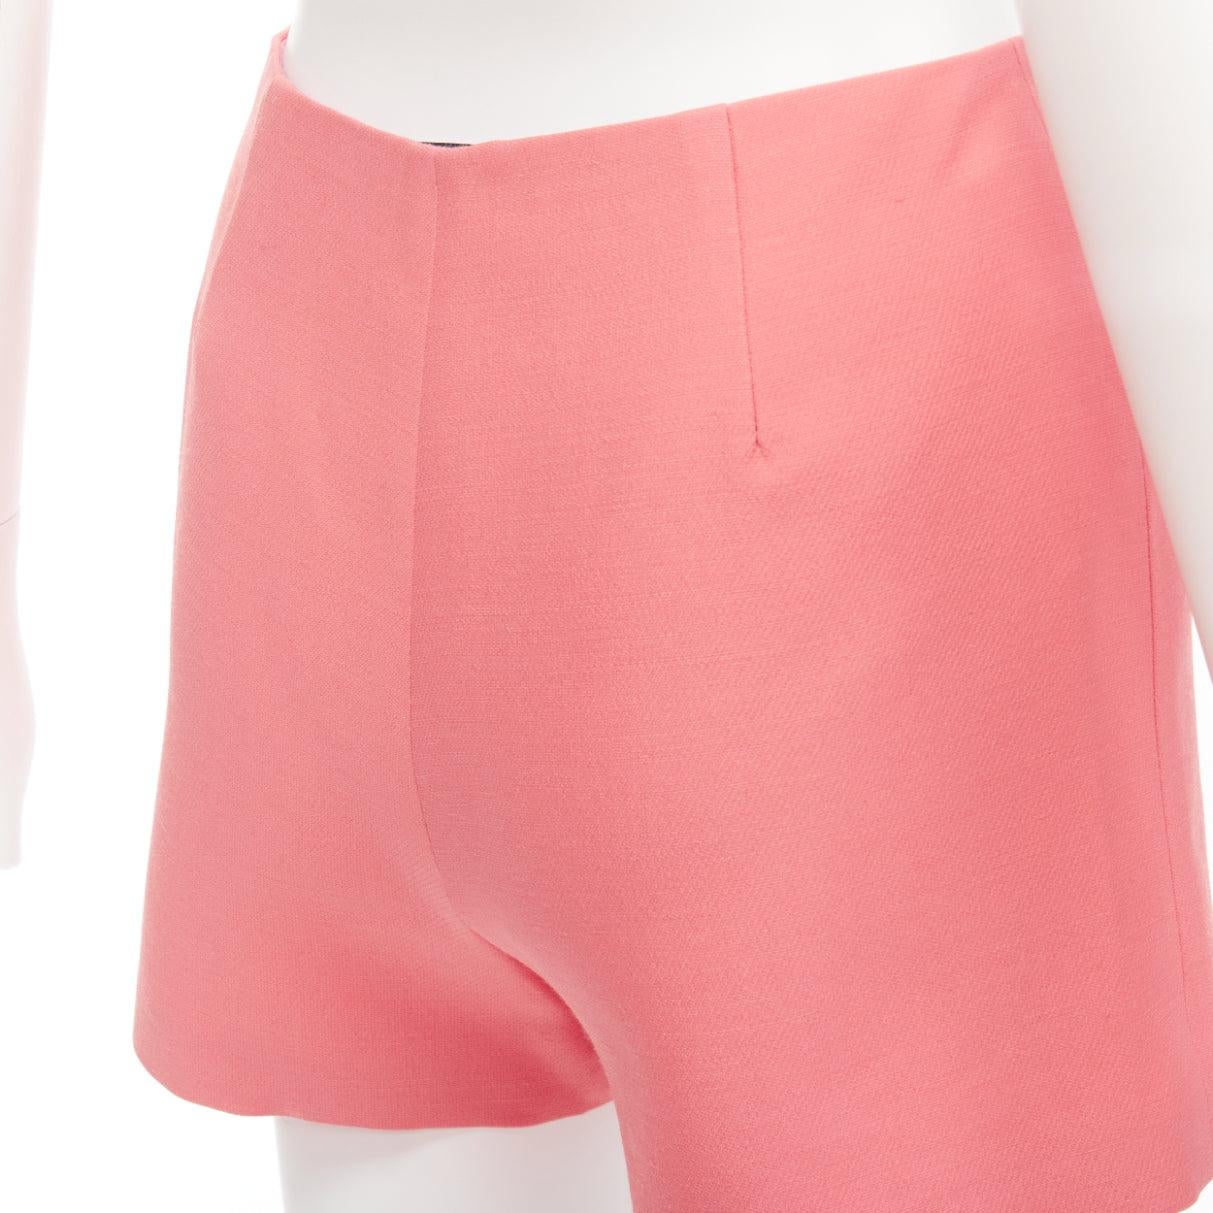 VALENTINO rose pink virgin wool silk high waist minimal wide shorts IT38 XS
Reference: AAWC/A00962
Brand: Valentino
Designer: Pier Paolo Piccioli
Material: Virgin Wool, Silk
Color: Pink
Pattern: Solid
Closure: Zip
Extra Details: Side zip.
Made in: